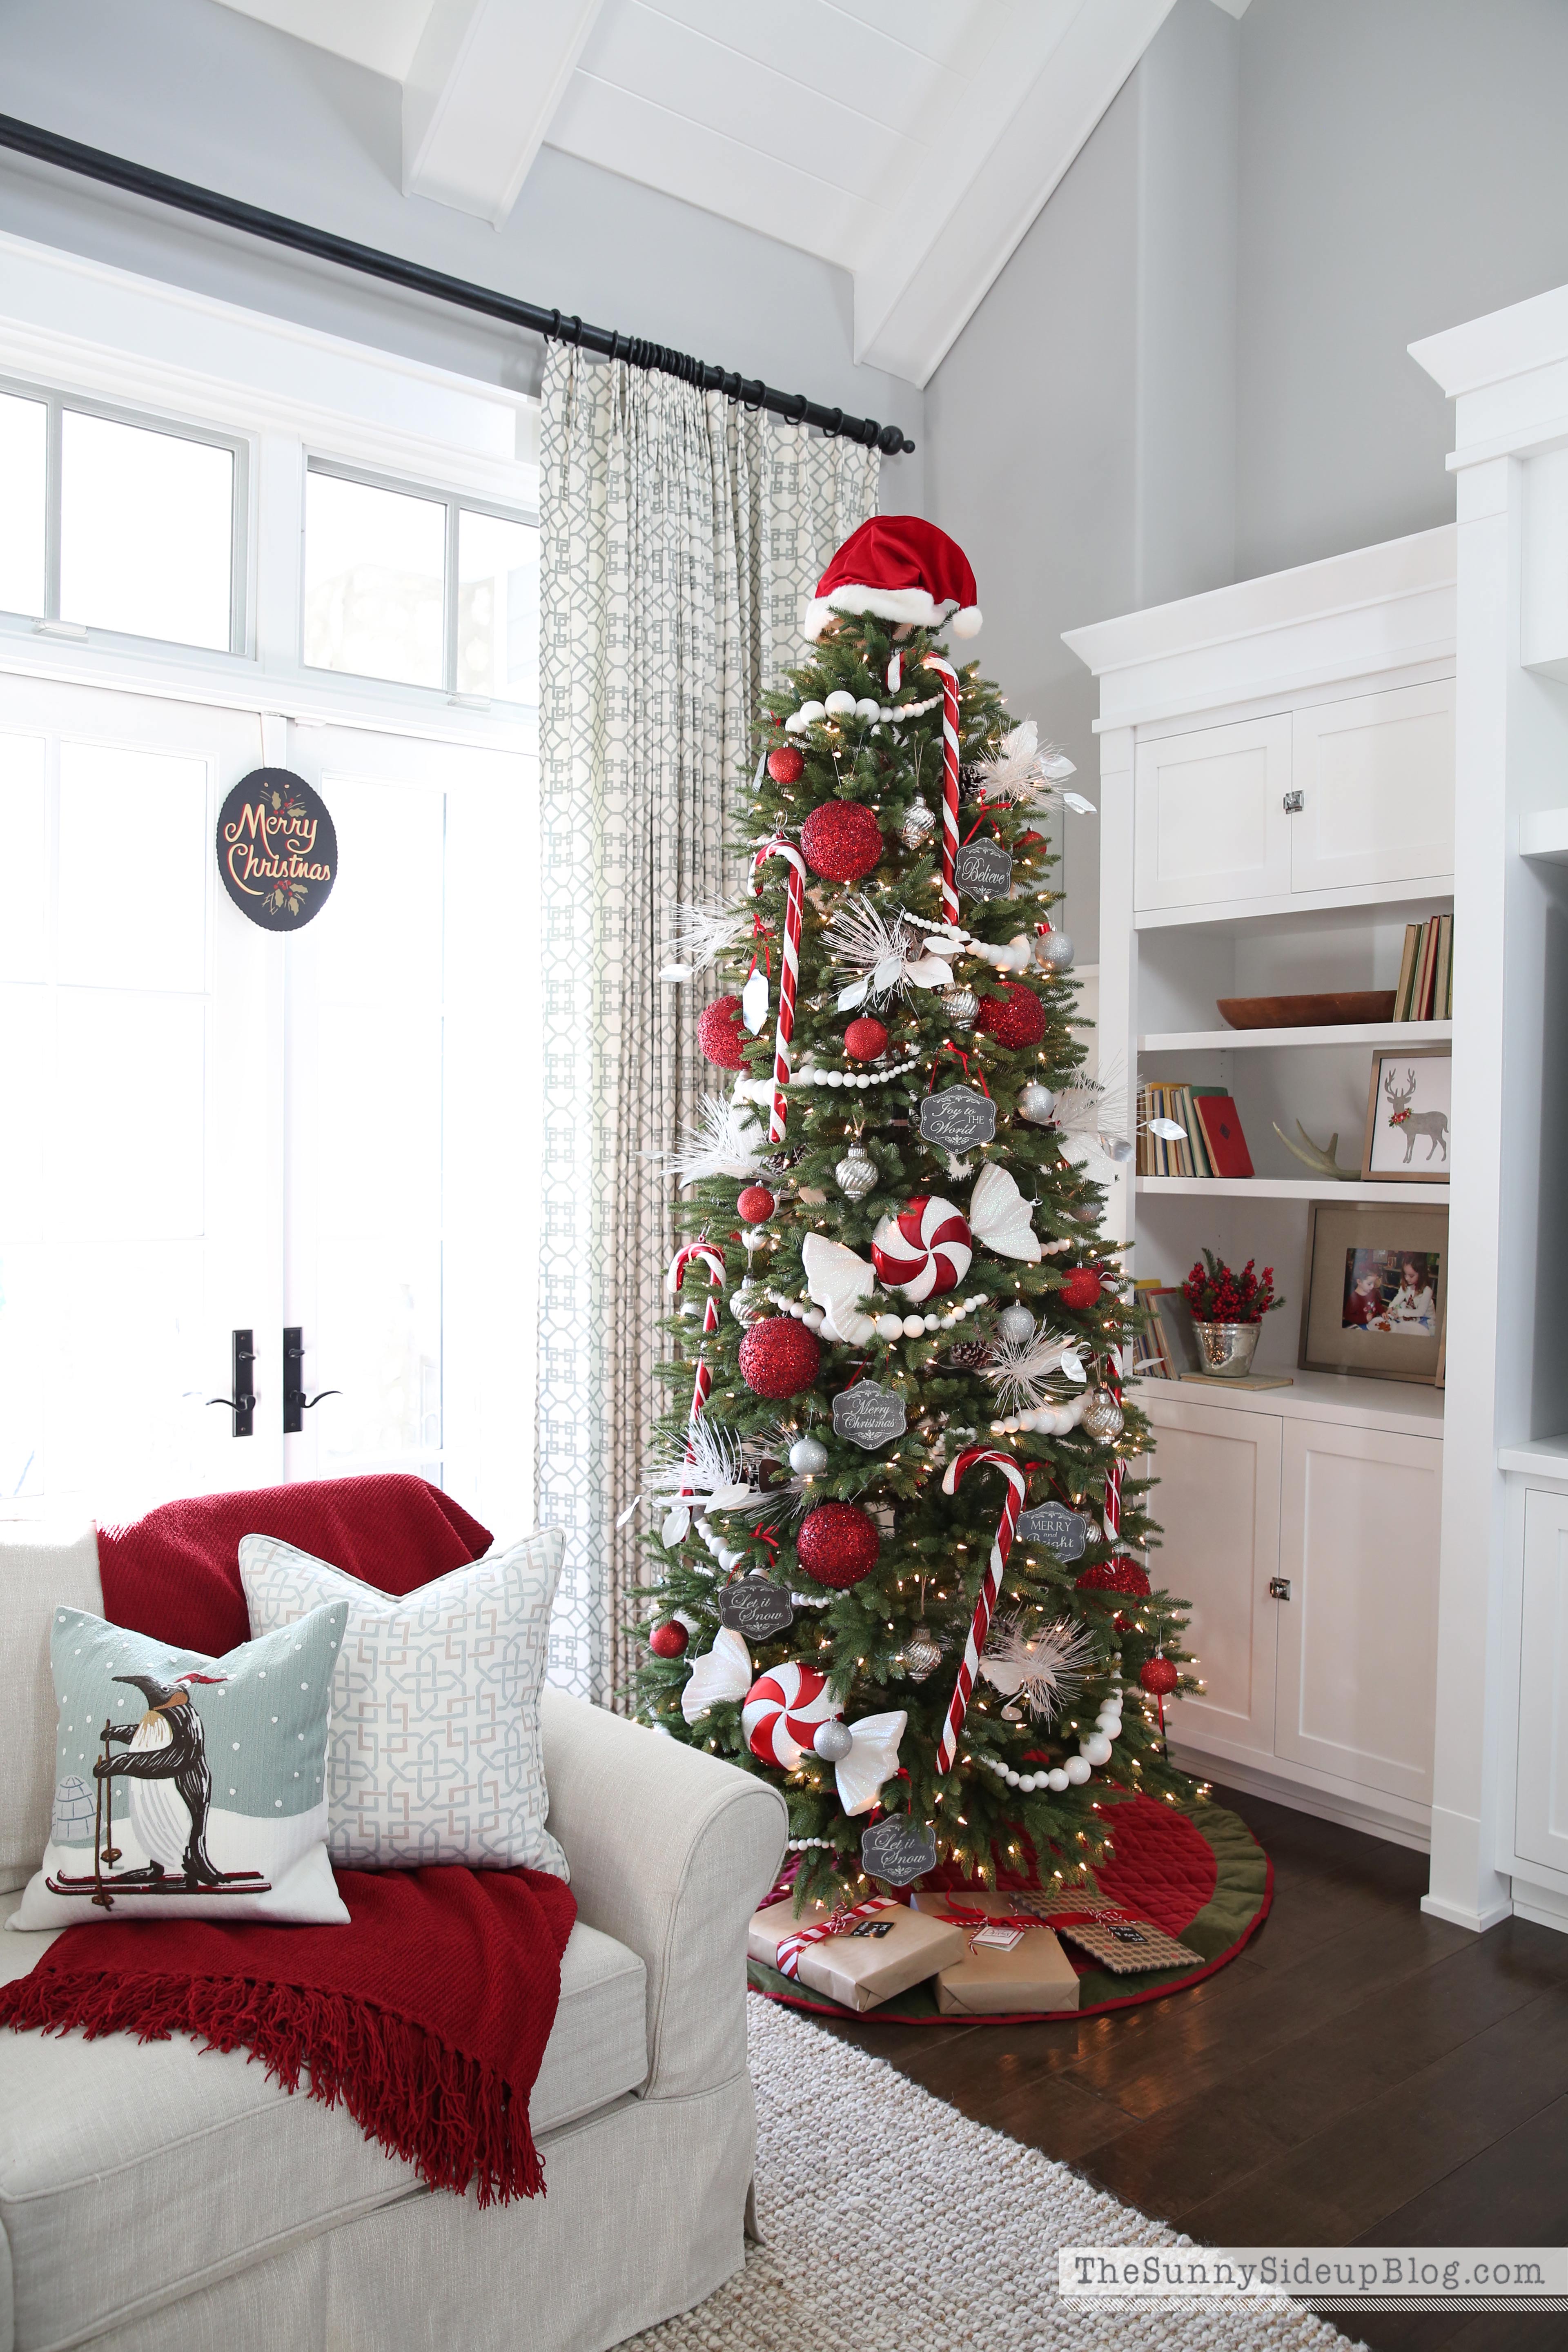 Our Christmas Tree - The Sunny Side Up Blog